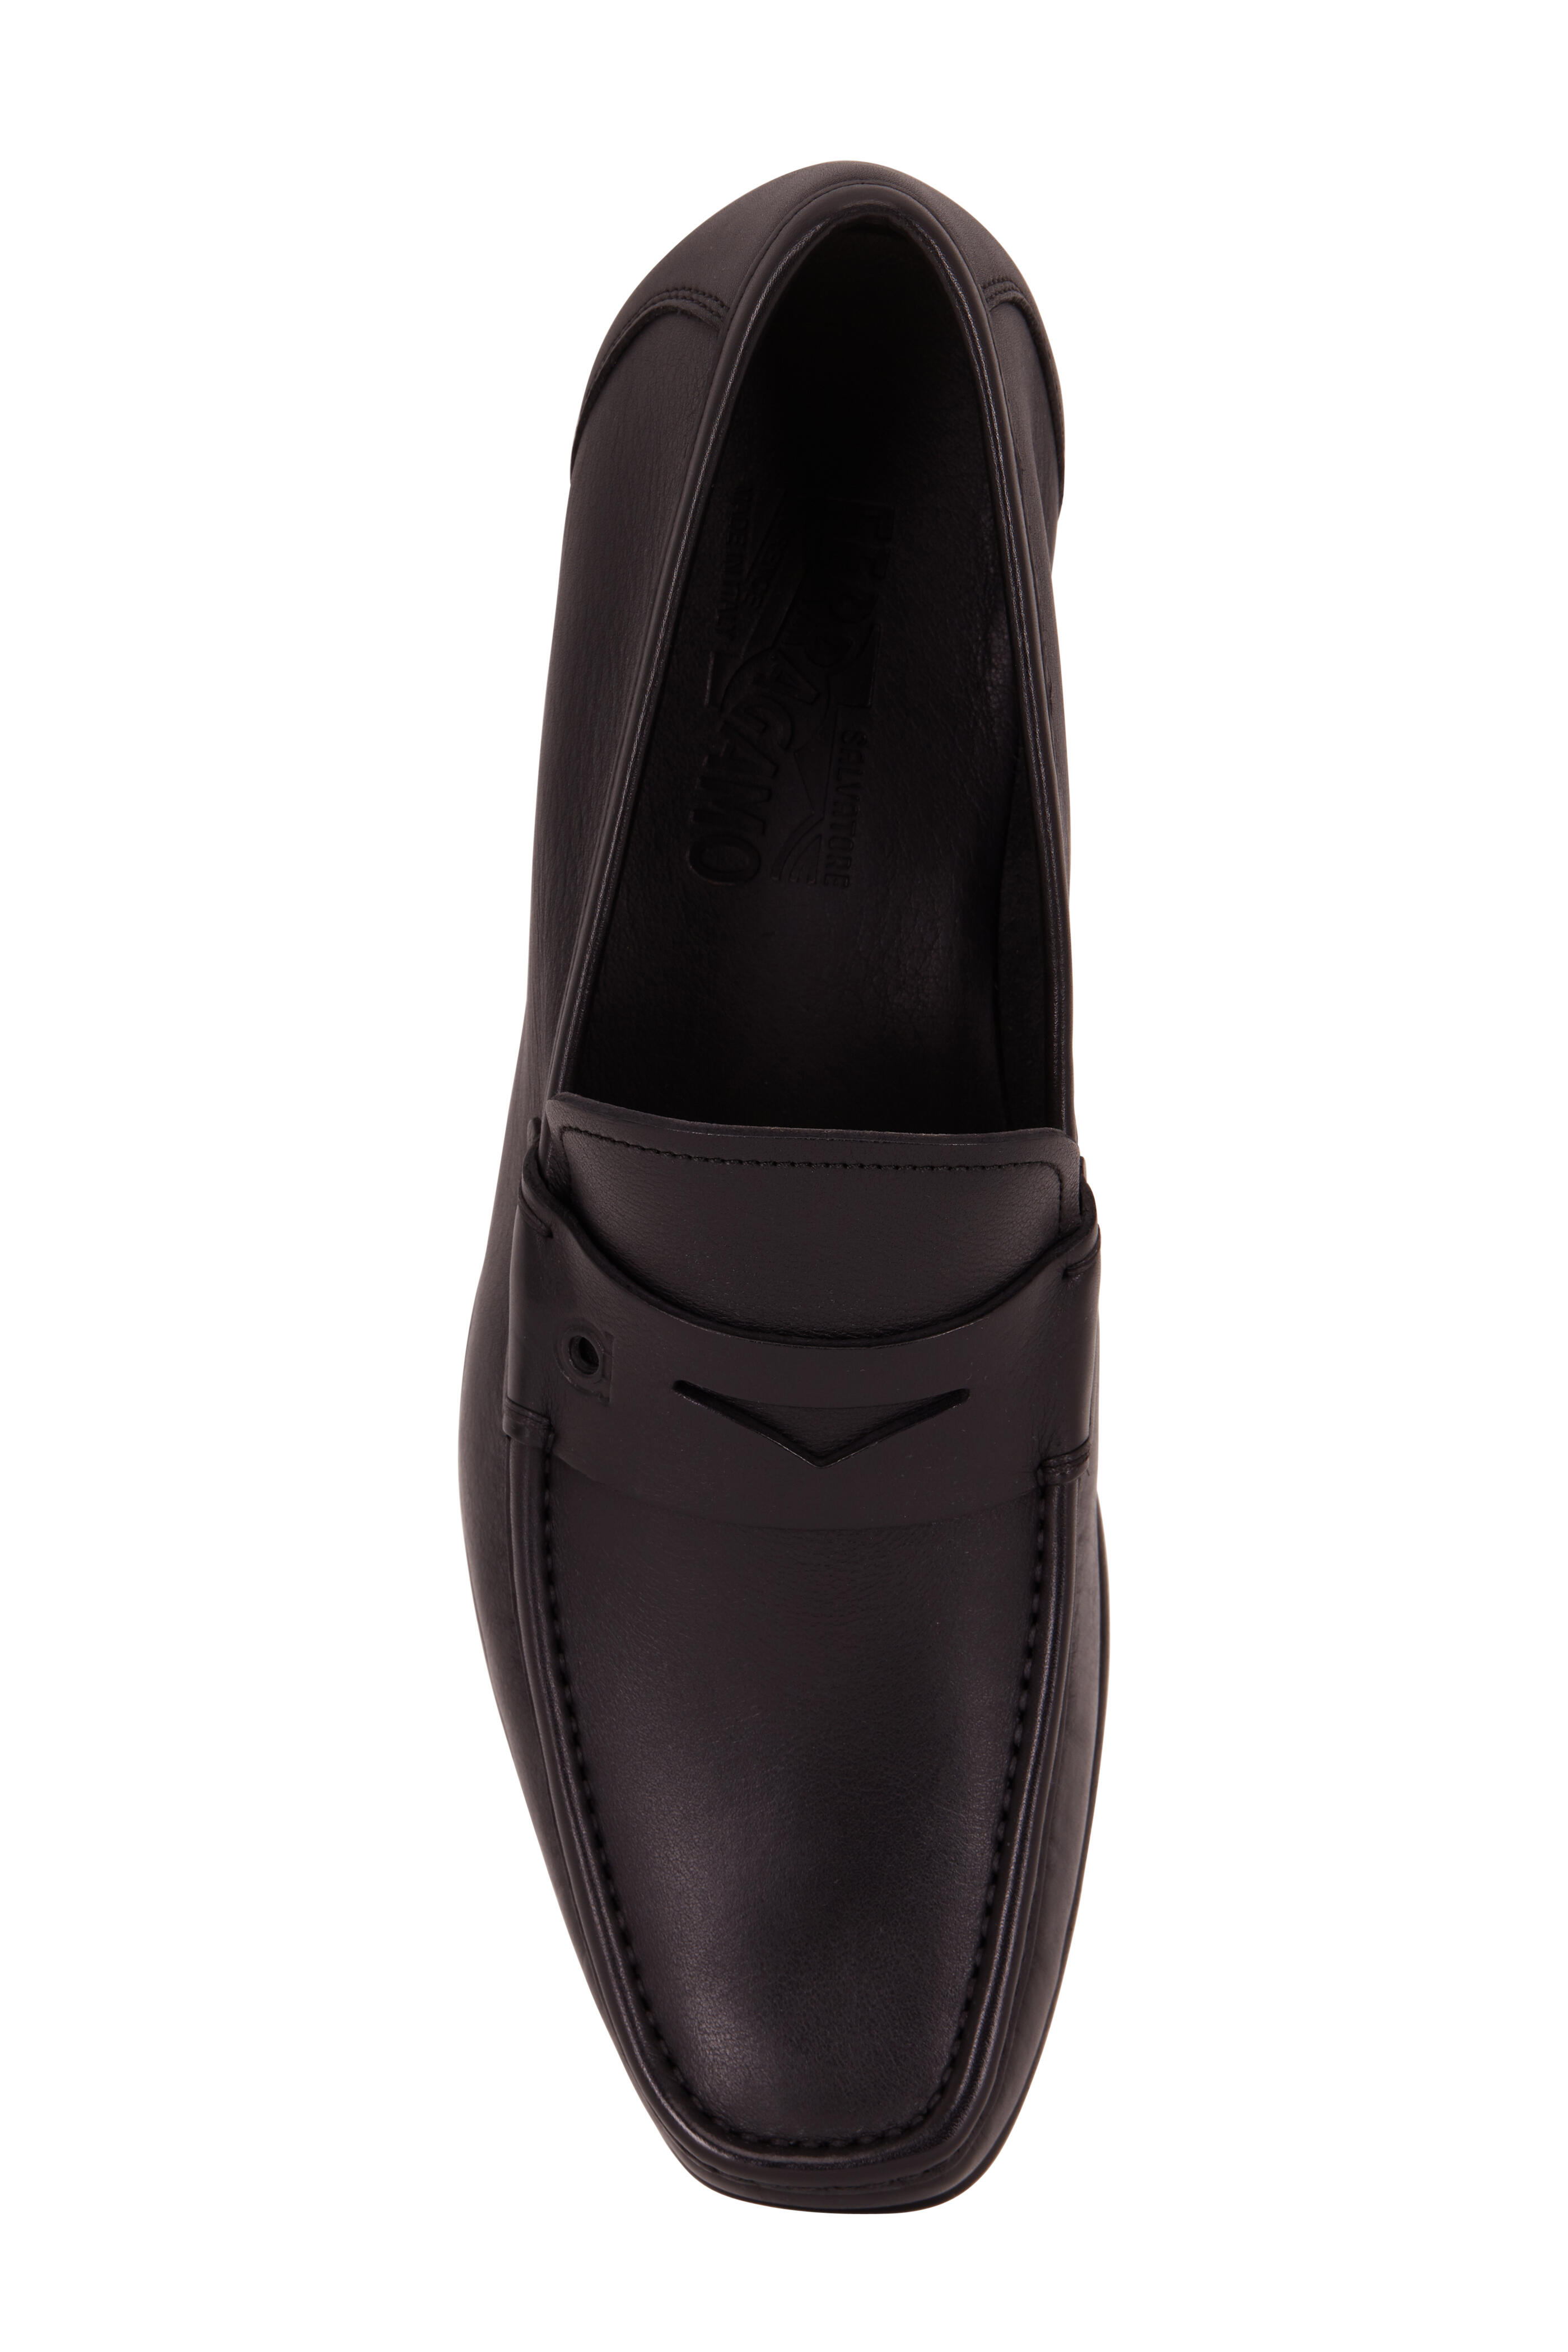 Ferragamo cut-out leather loafers - Black